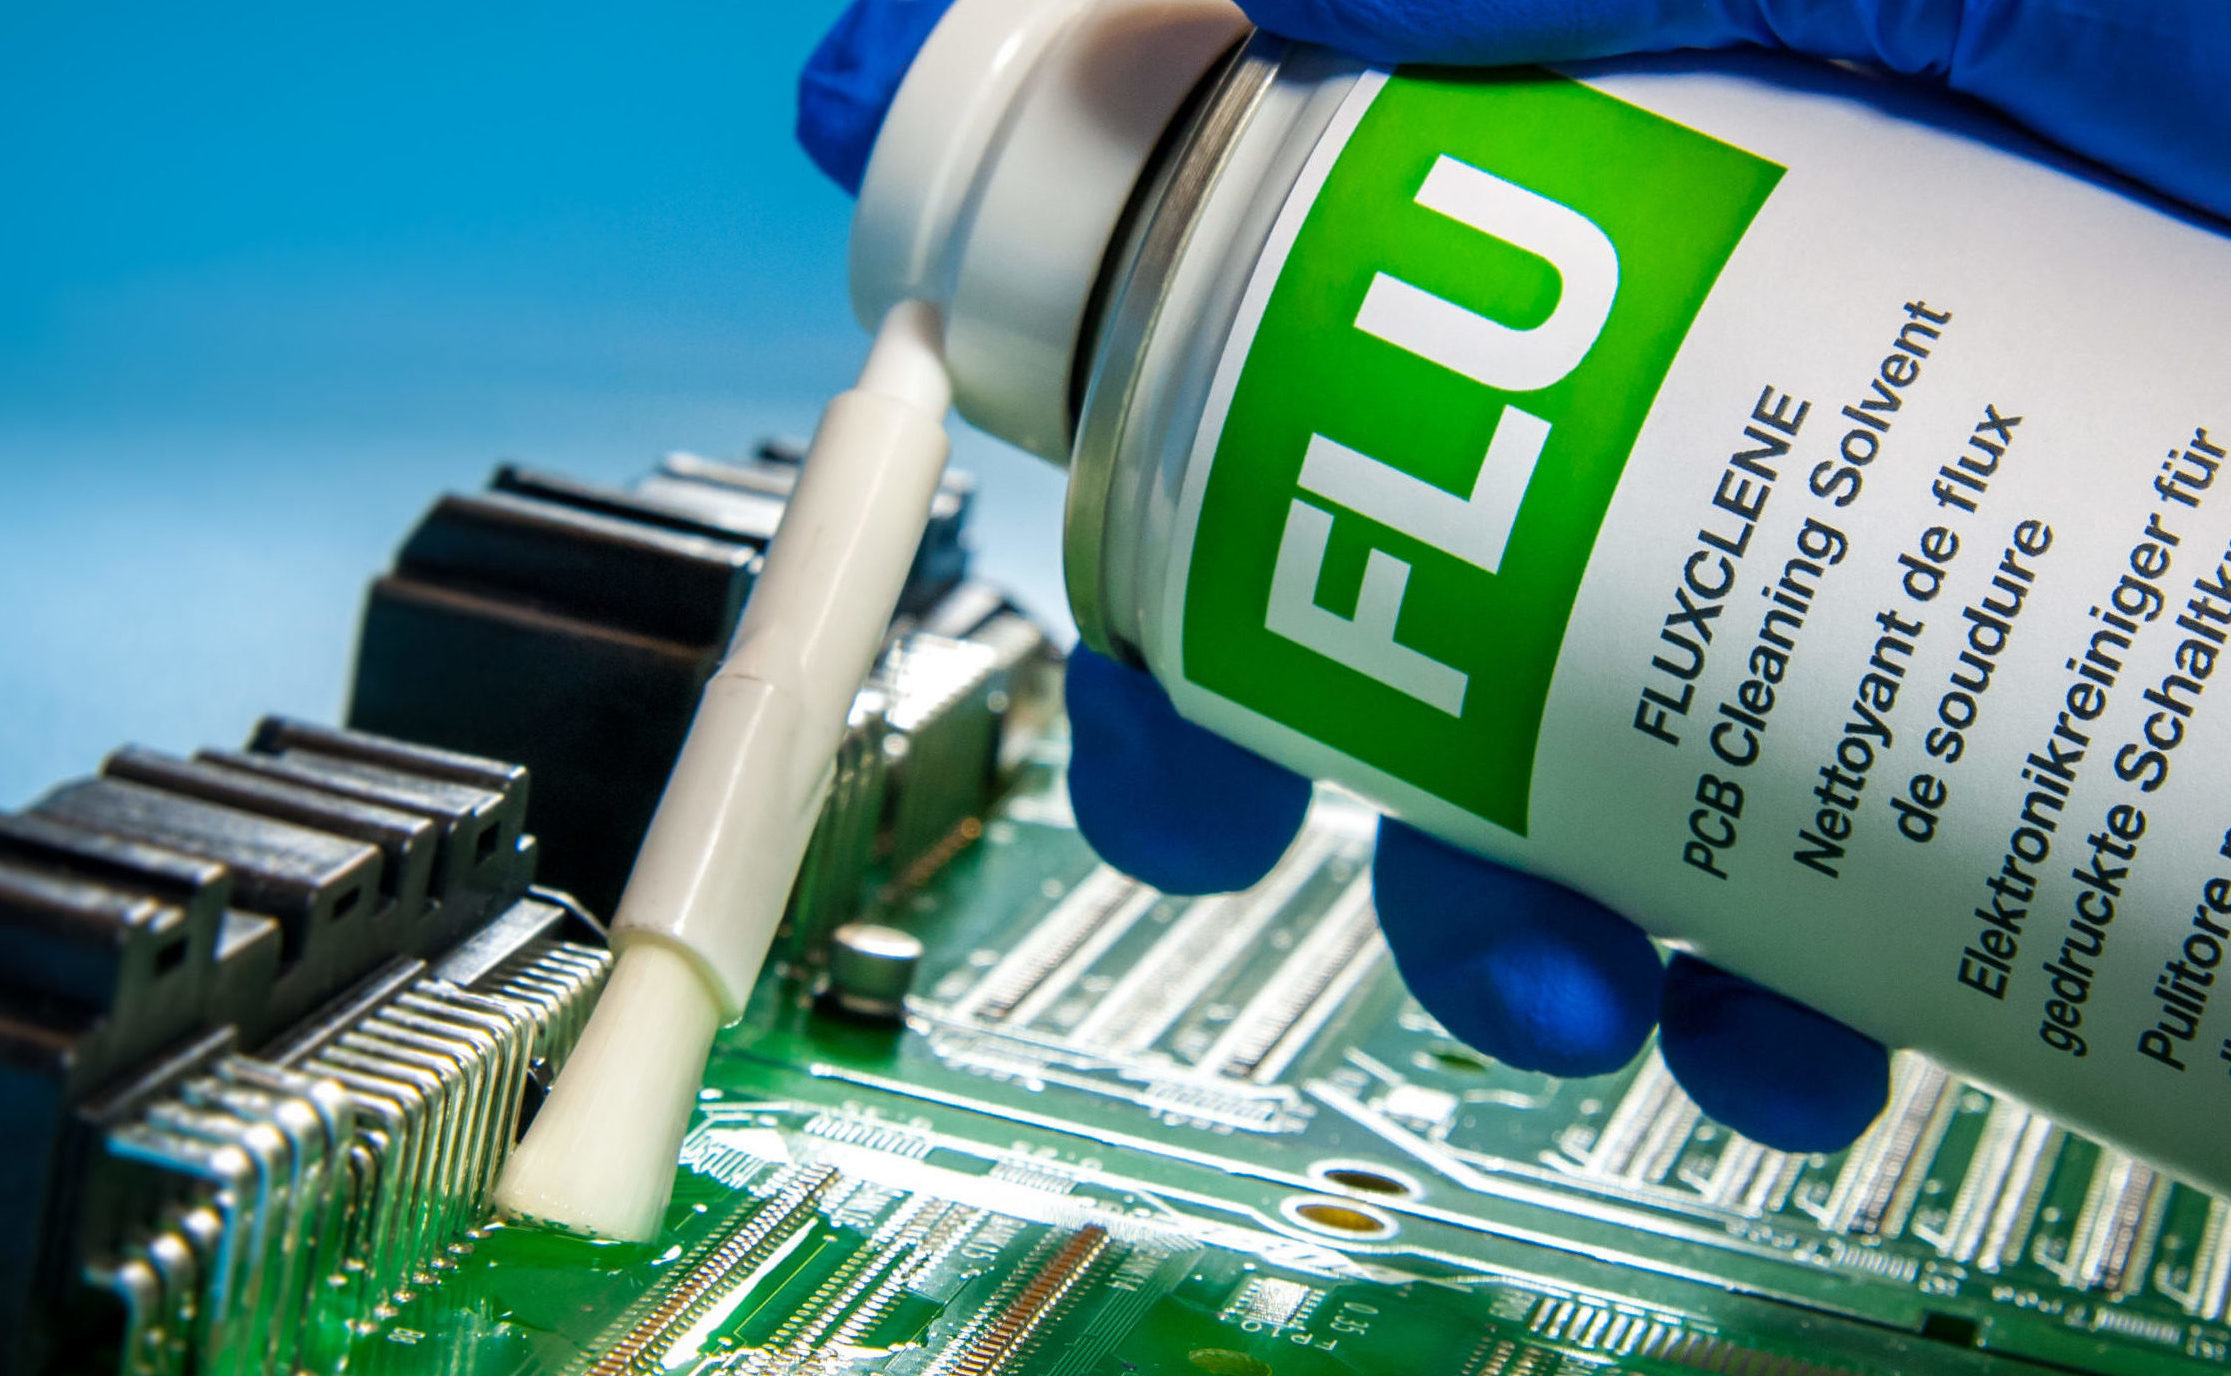 Electrolube PCB Cleaning Chemicals - FLU